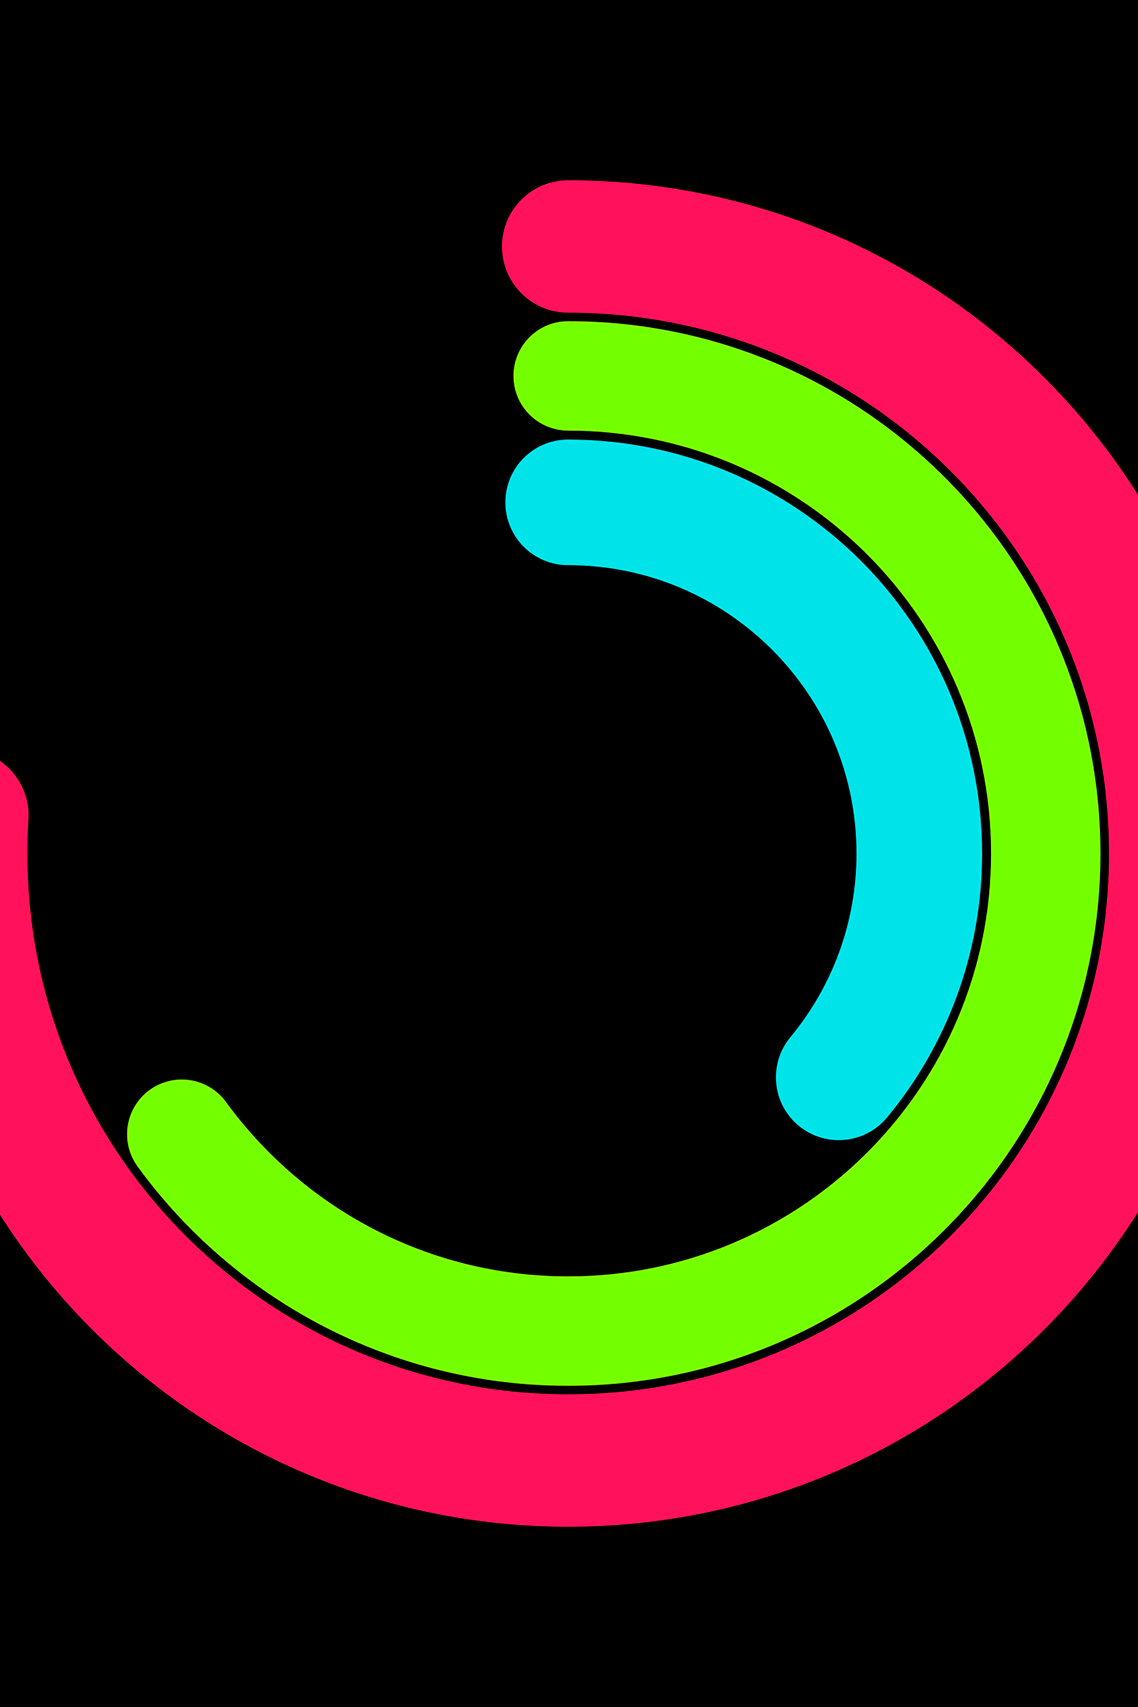 Motion graphics inspired by the Apple Watch activity rings.